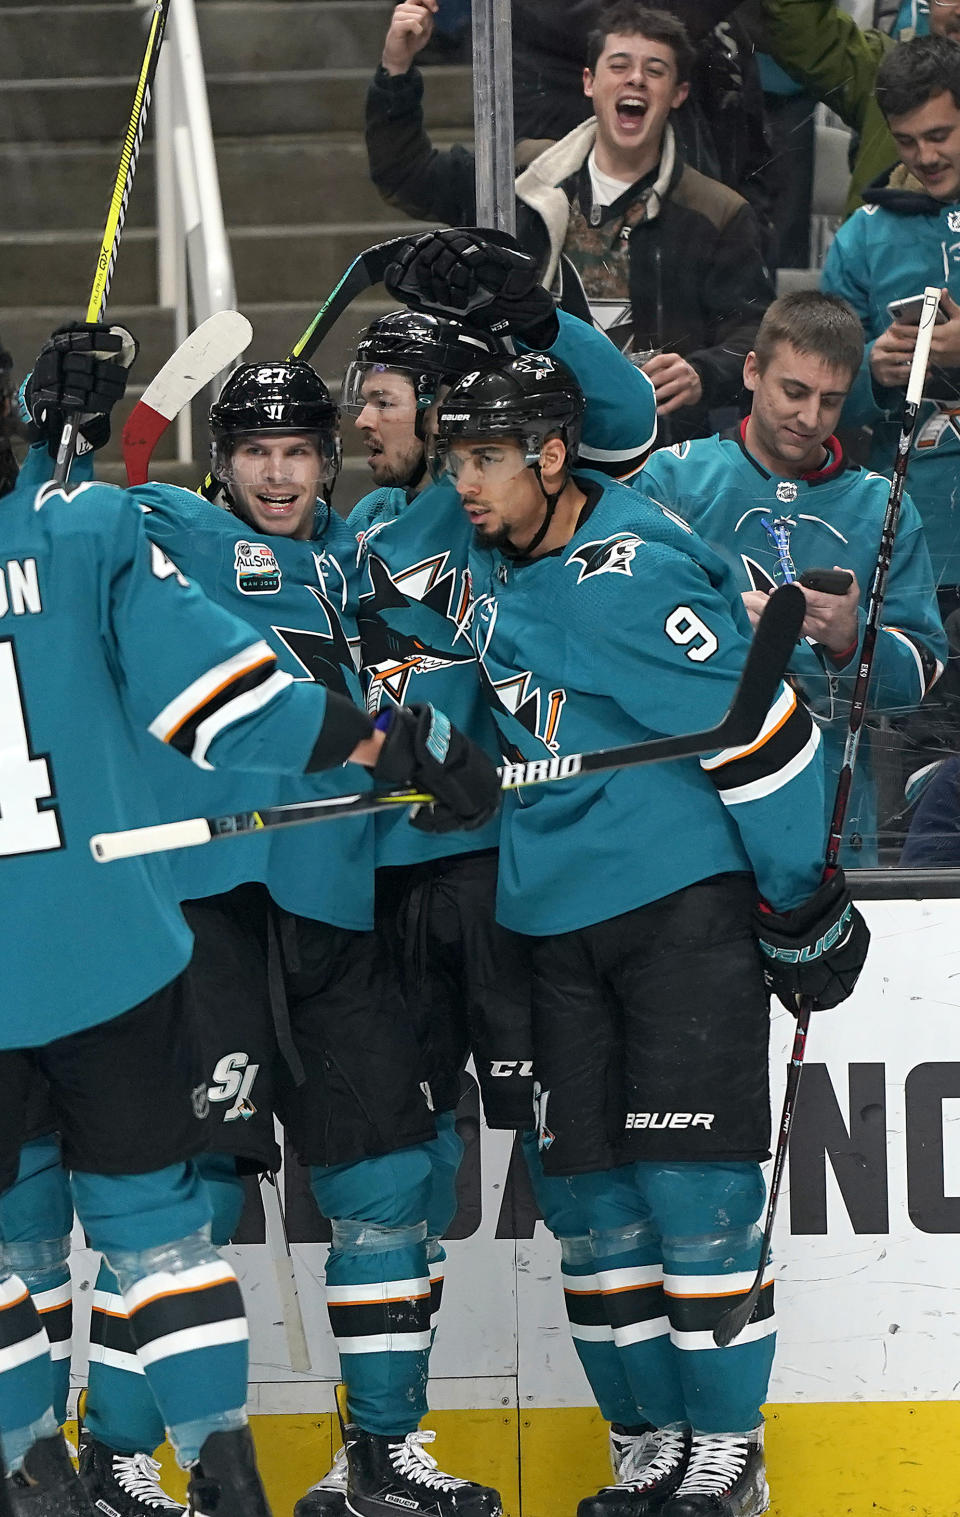 San Jose Sharks center Tomas Hertl, center, celebrates with Joonas Donskoi (27) and Evander Kane (9) after scoring a goal against the Pittsburgh Penguins during the first period of an NHL hockey game in San Jose, Calif., Tuesday, Jan. 15, 2019. (AP Photo/Tony Avelar)